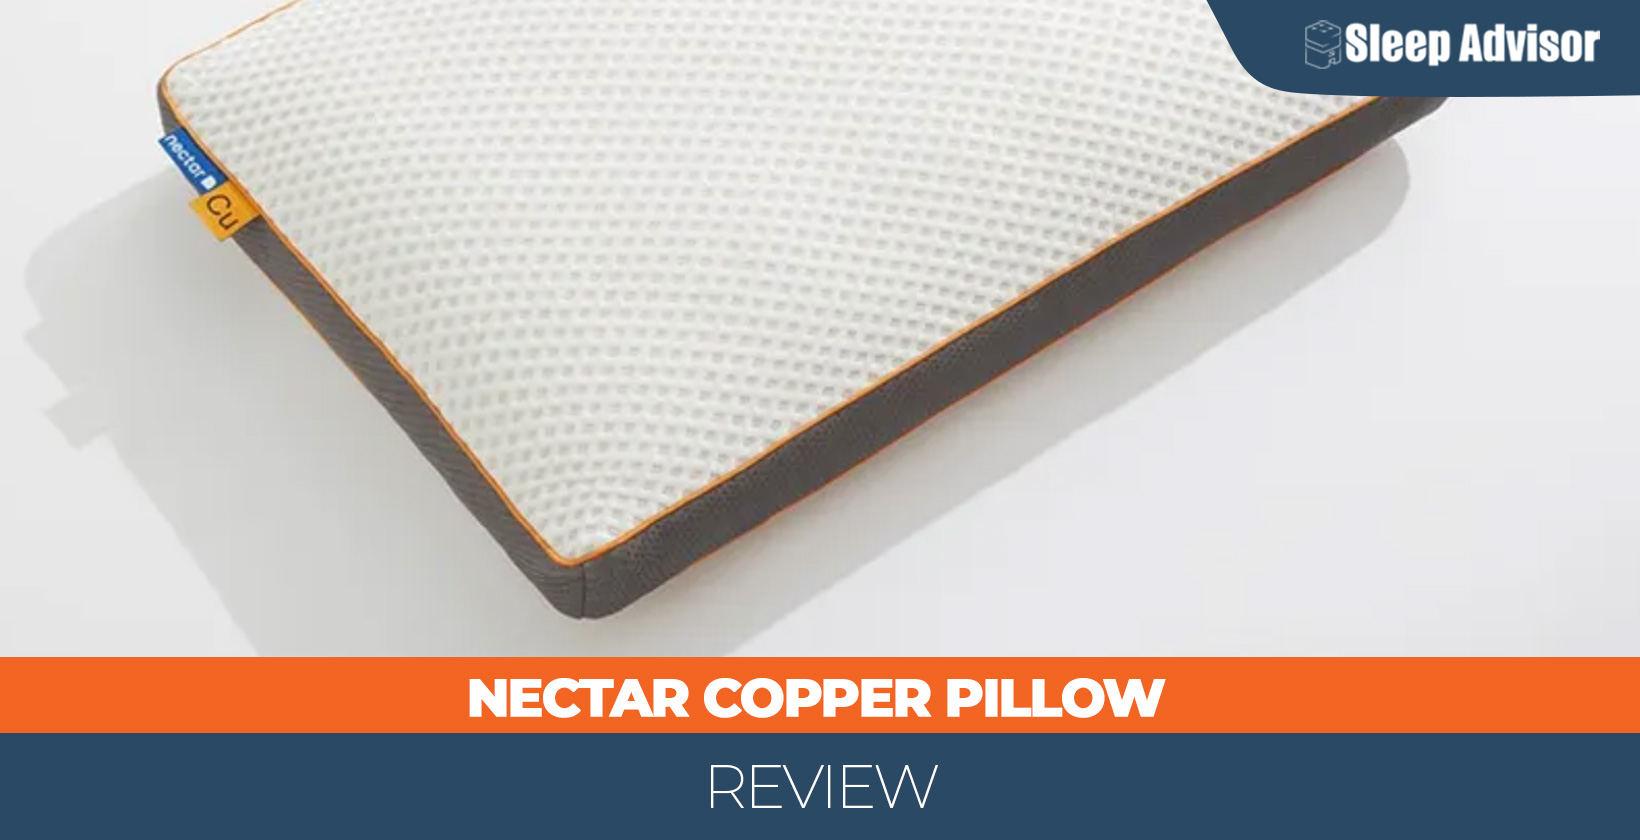 Our in depth overview of the Nectar Copper Pillow